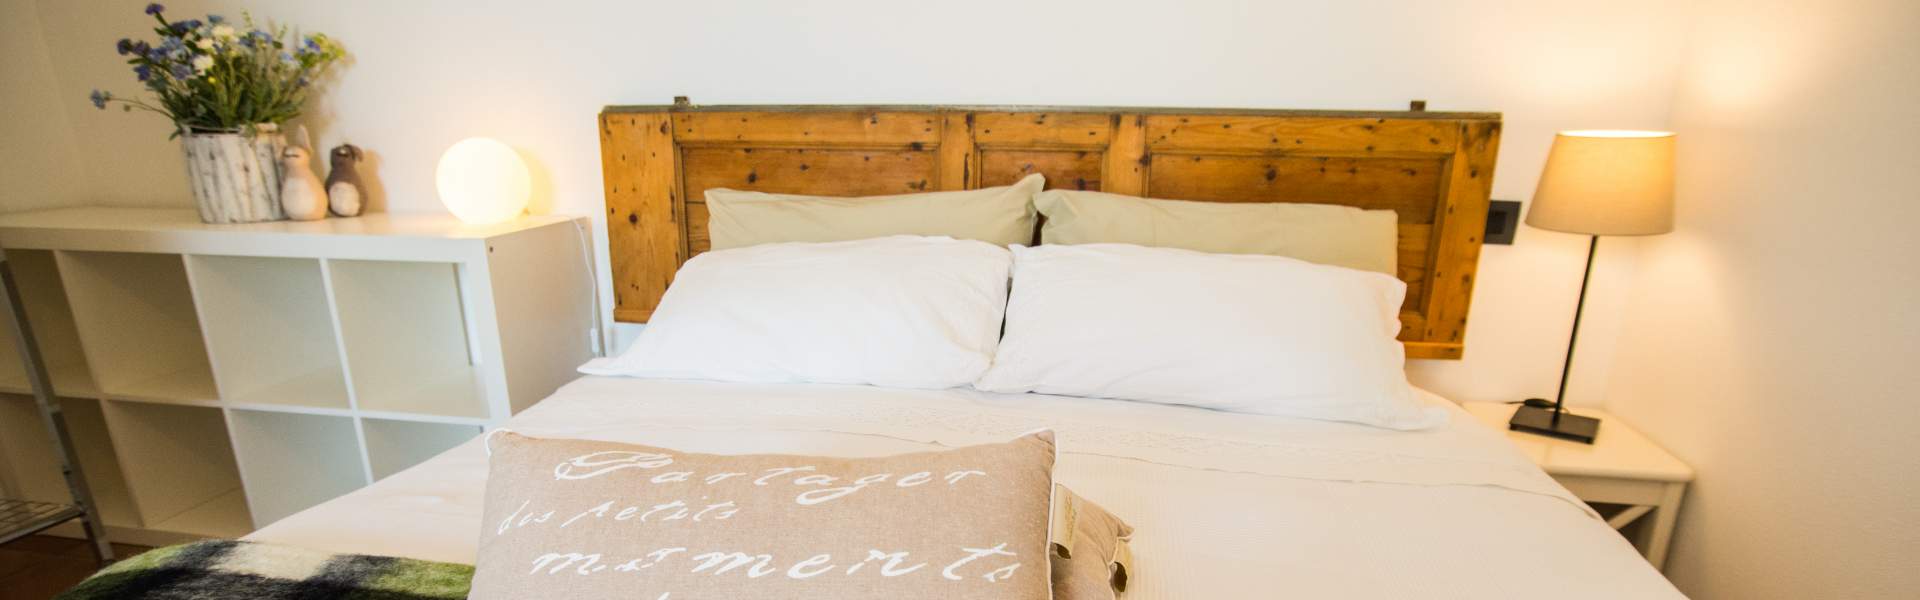 Bed and Breakfast Le Clementine, Camogli